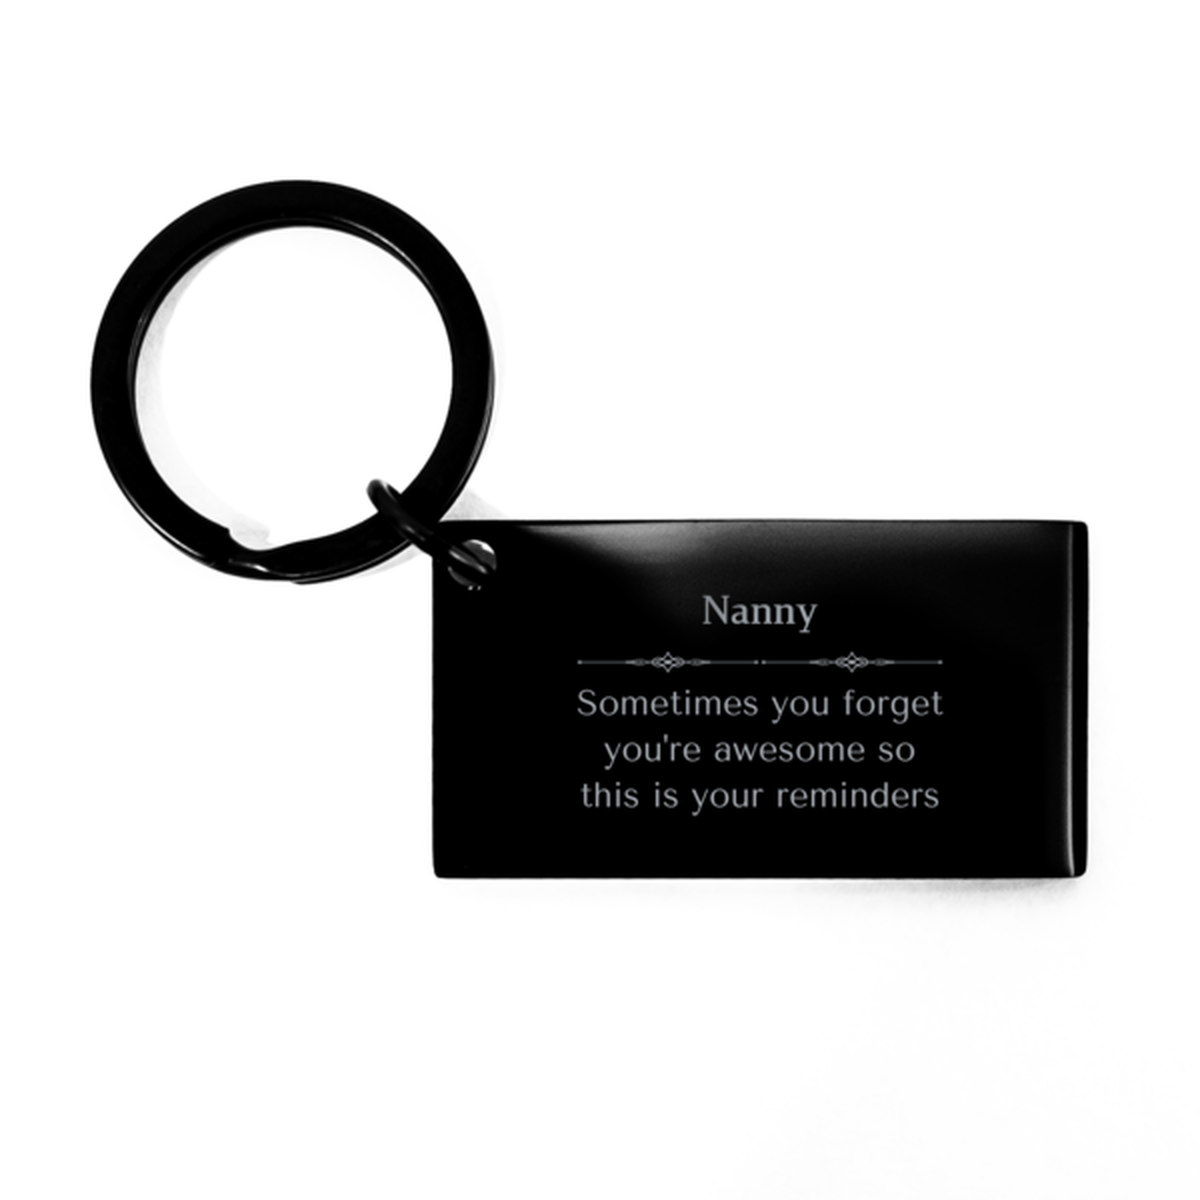 Sentimental Nanny Keychain, Parole Officer Sometimes you forget you're awesome so this is your reminders, Graduation Christmas Birthday Gifts for Nanny, Men, Women, Coworkers